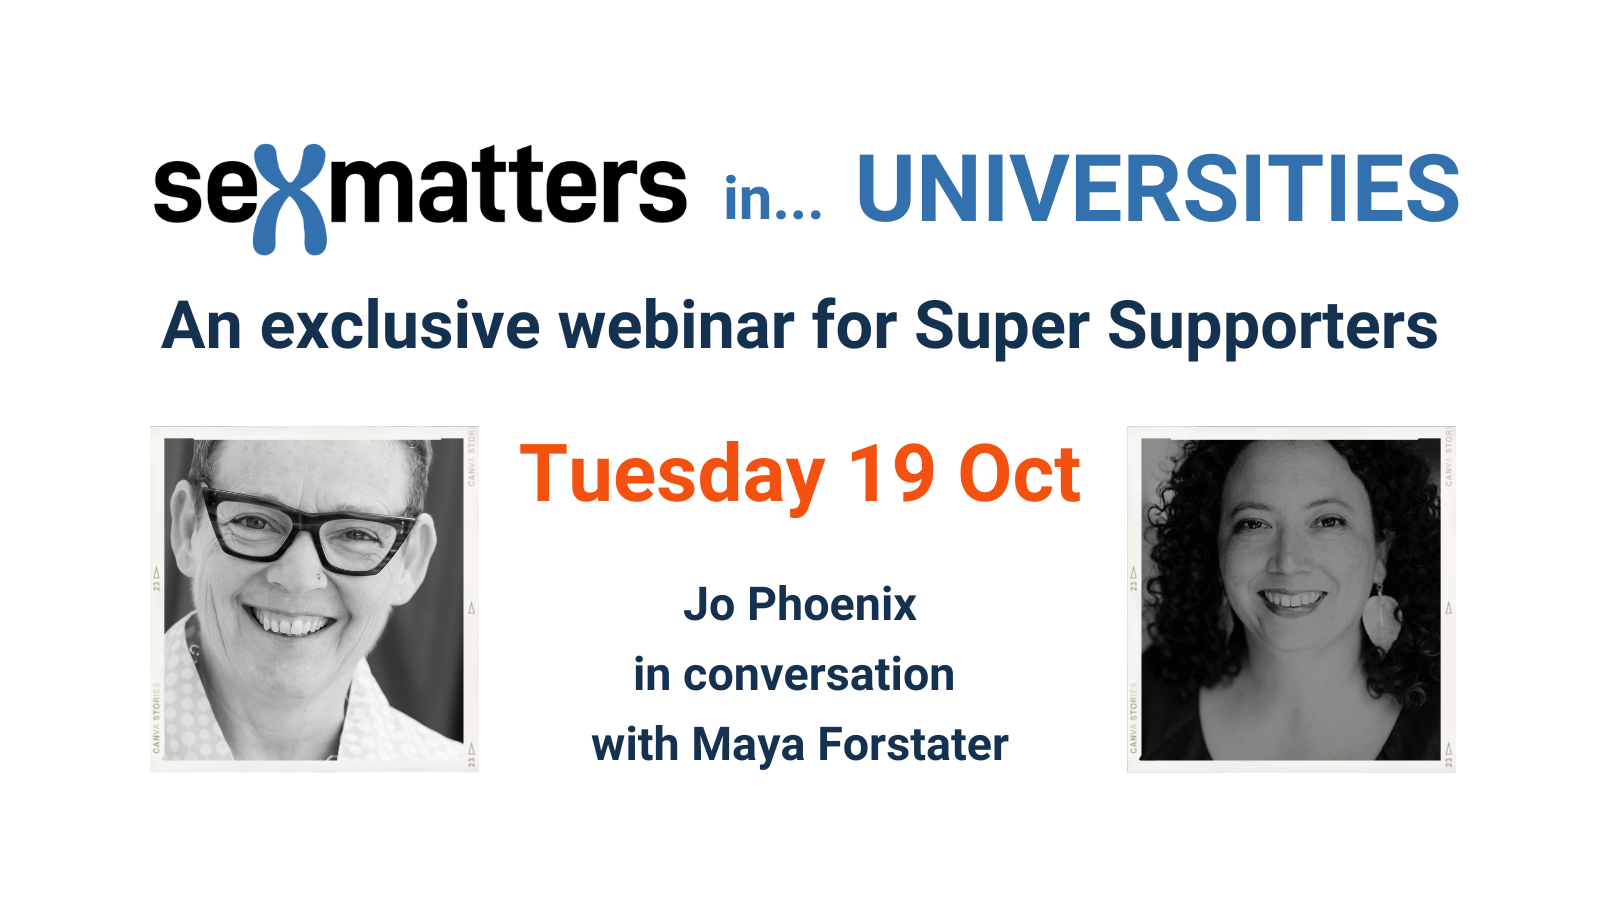 Sex Matters in universities. Exclusive webinar for super supporters Tuesday 19 Oct Jo phoenix in conversation with Maya Forstater